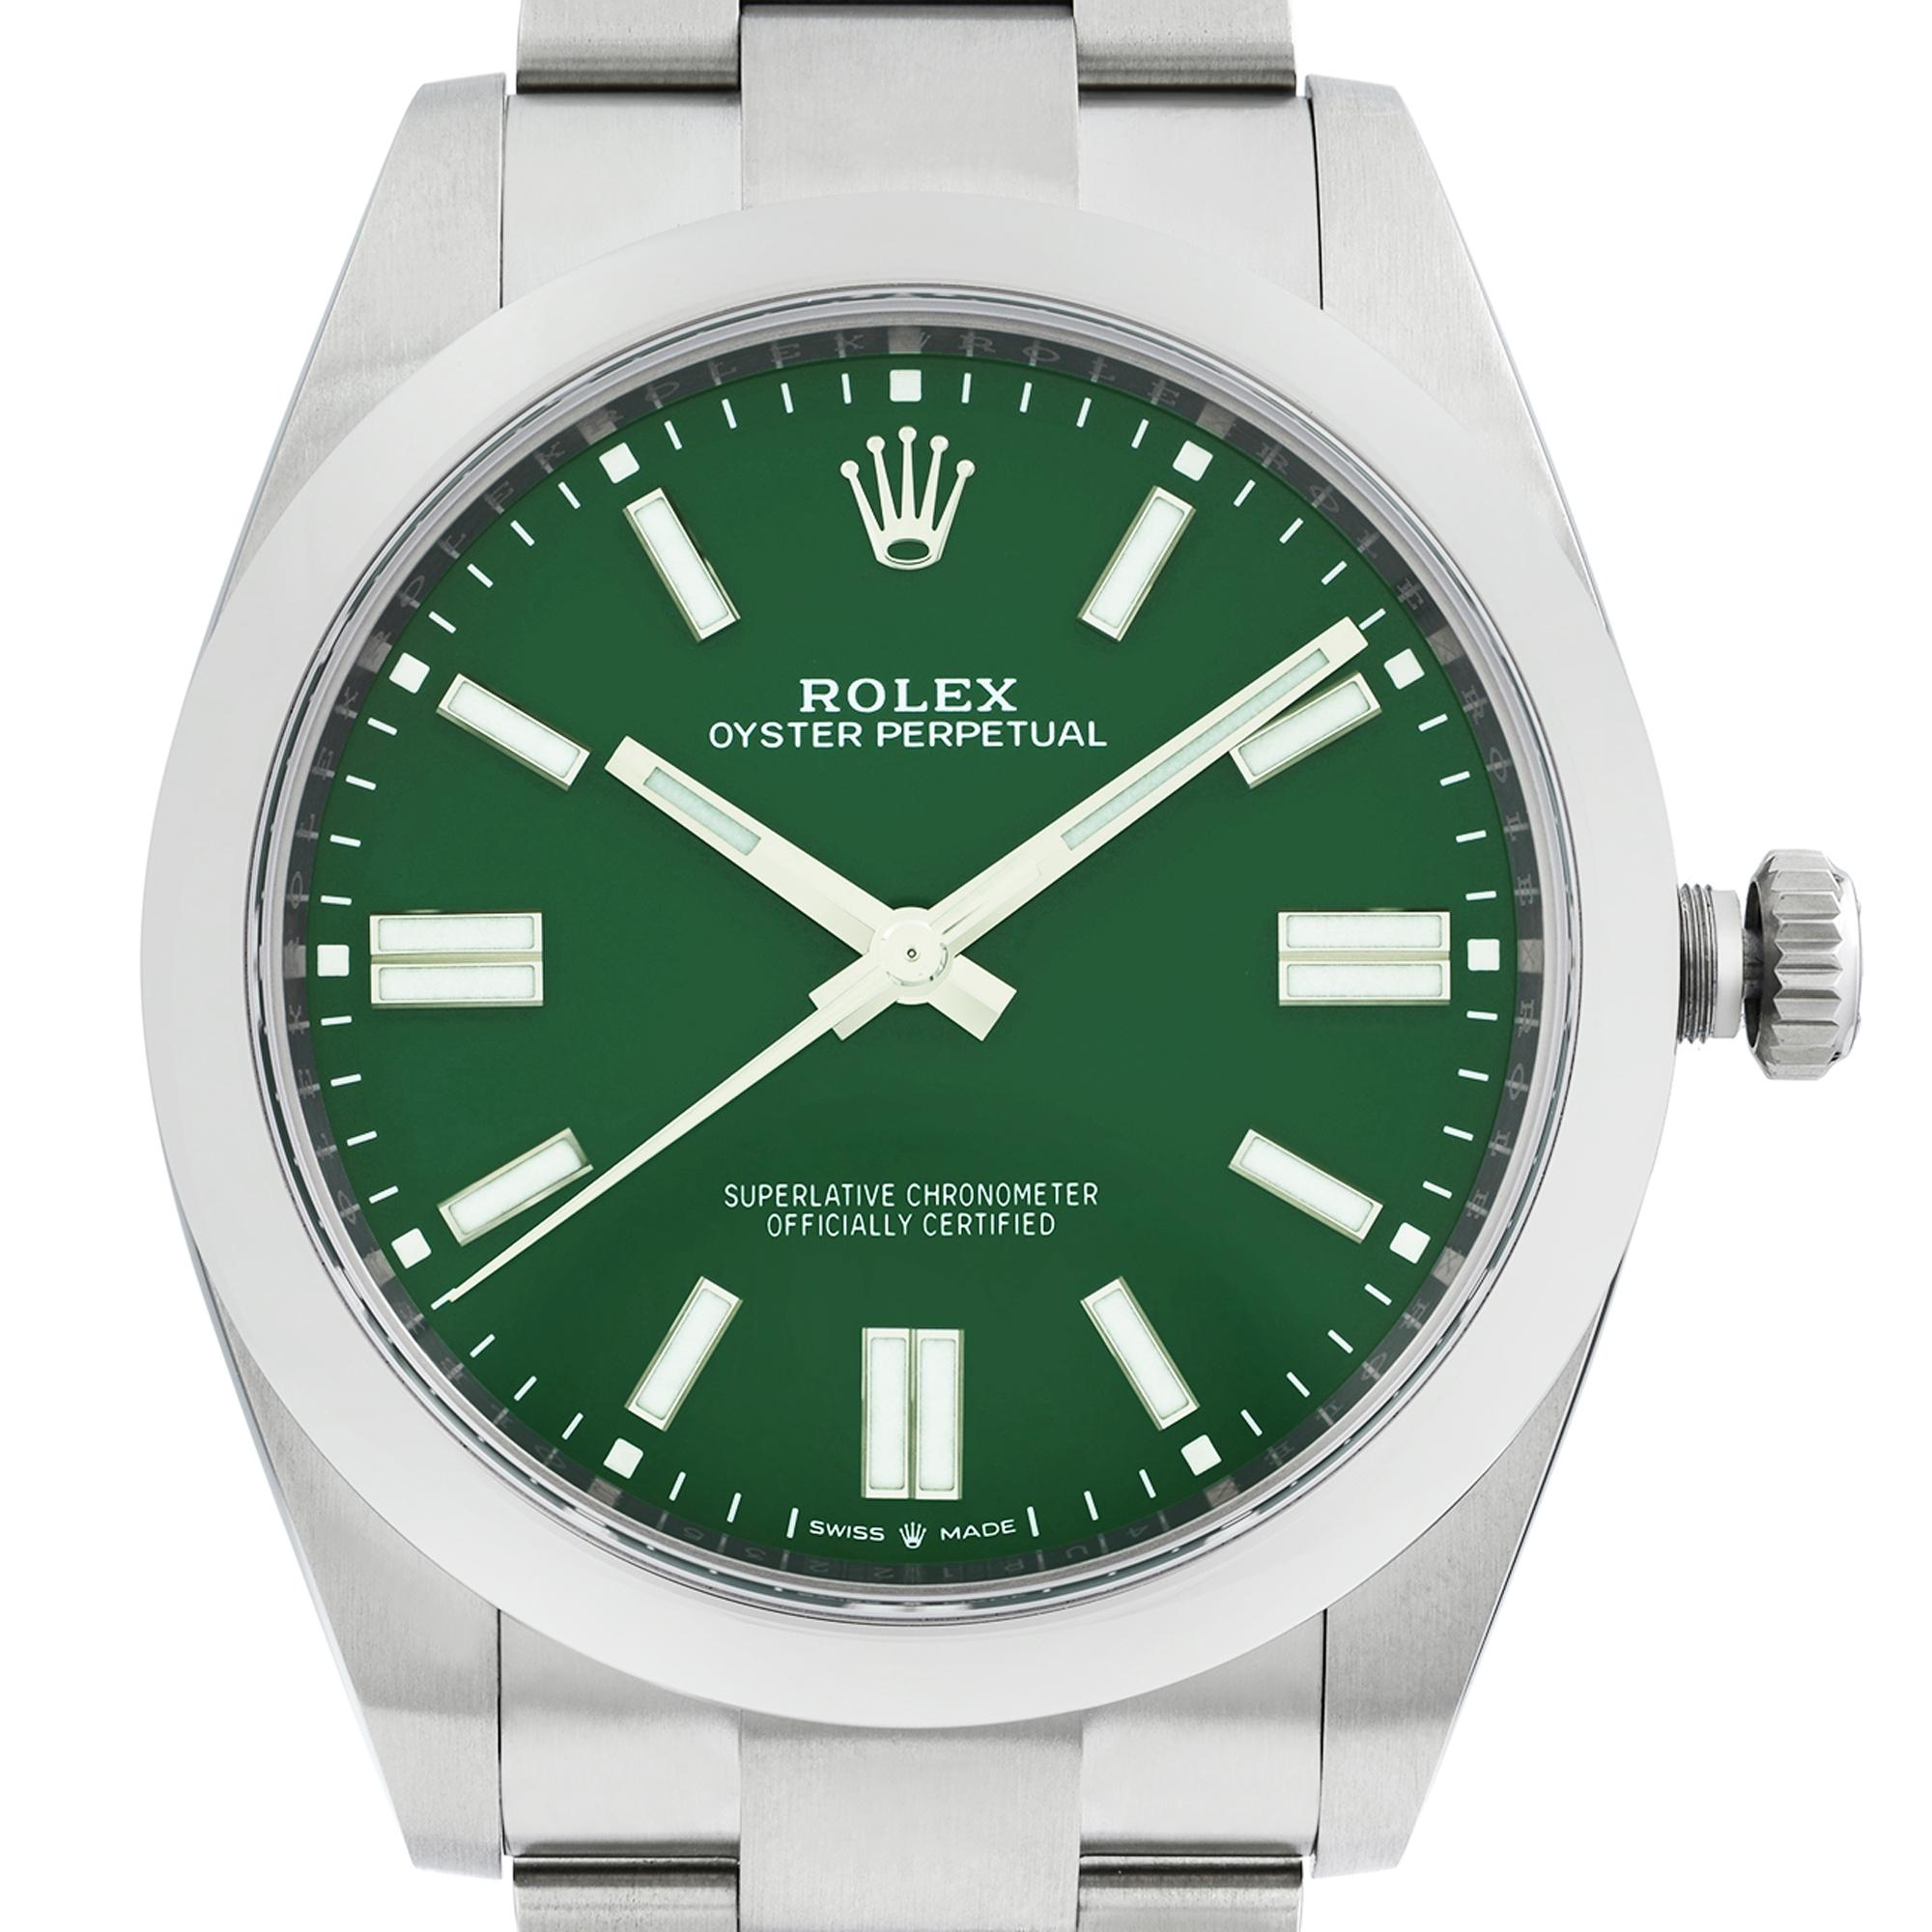 Unworn. Aftermarket custom dial. Comes with the Original Box and Papers. Covered By 3-Year Chronostore Warranty.
Details:
Brand Rolex
Color Green
Department Men
Model Number 124300
Model Rolex Oyster Perpetual
Style Classic, Dress/Formal,